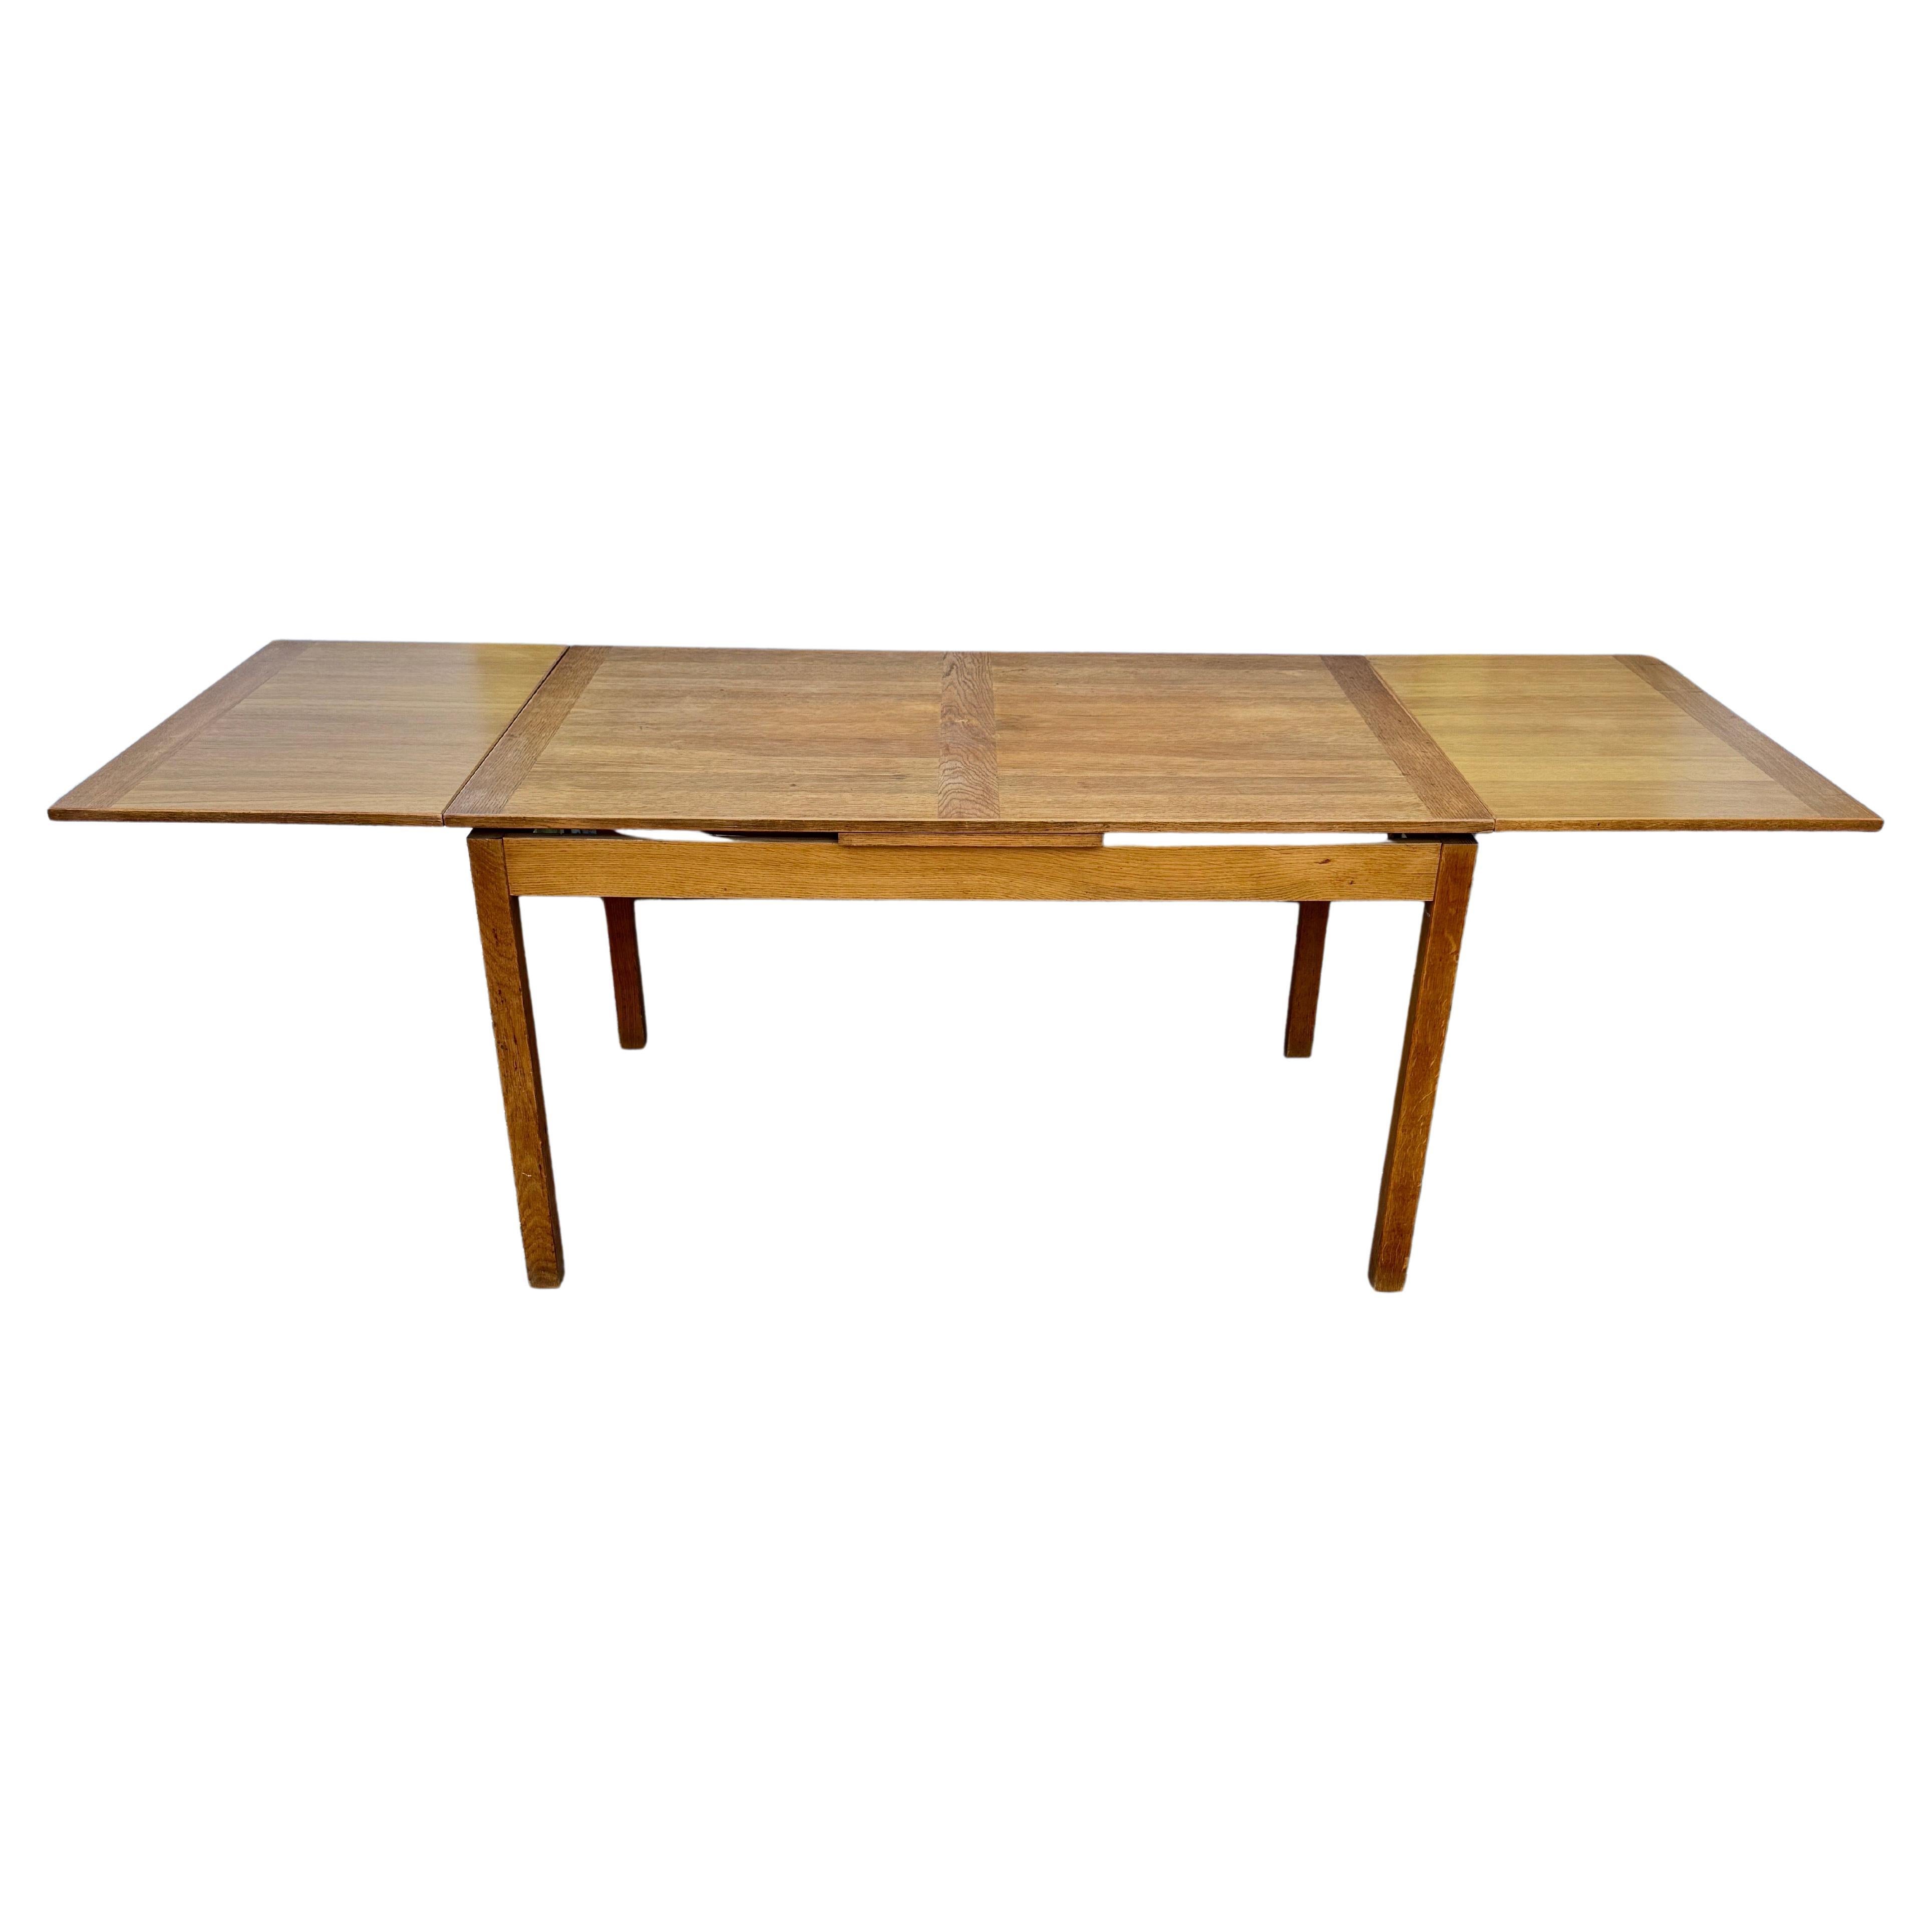 Mid-Century Extension Dining Table, 1950's Denmark 

The natural aging and wood grain top is complemented by the solid wood frame. This expandable draw leaf table features classic Danish design with its clean lines. A perfect dining table for any